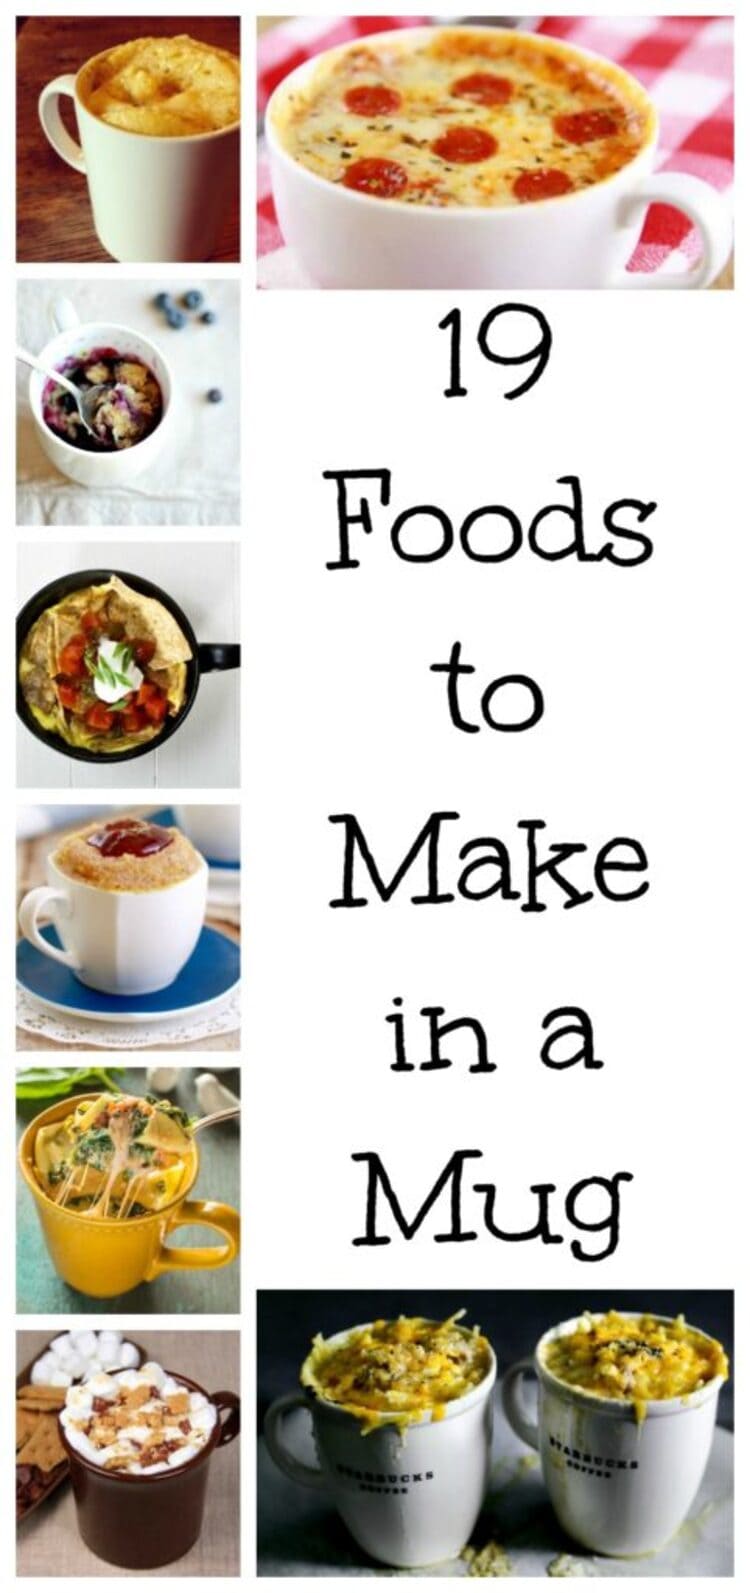 19 foods to make in a mug collage of different microwave mug snacks like pizza, lasagna, donuts, pancakes